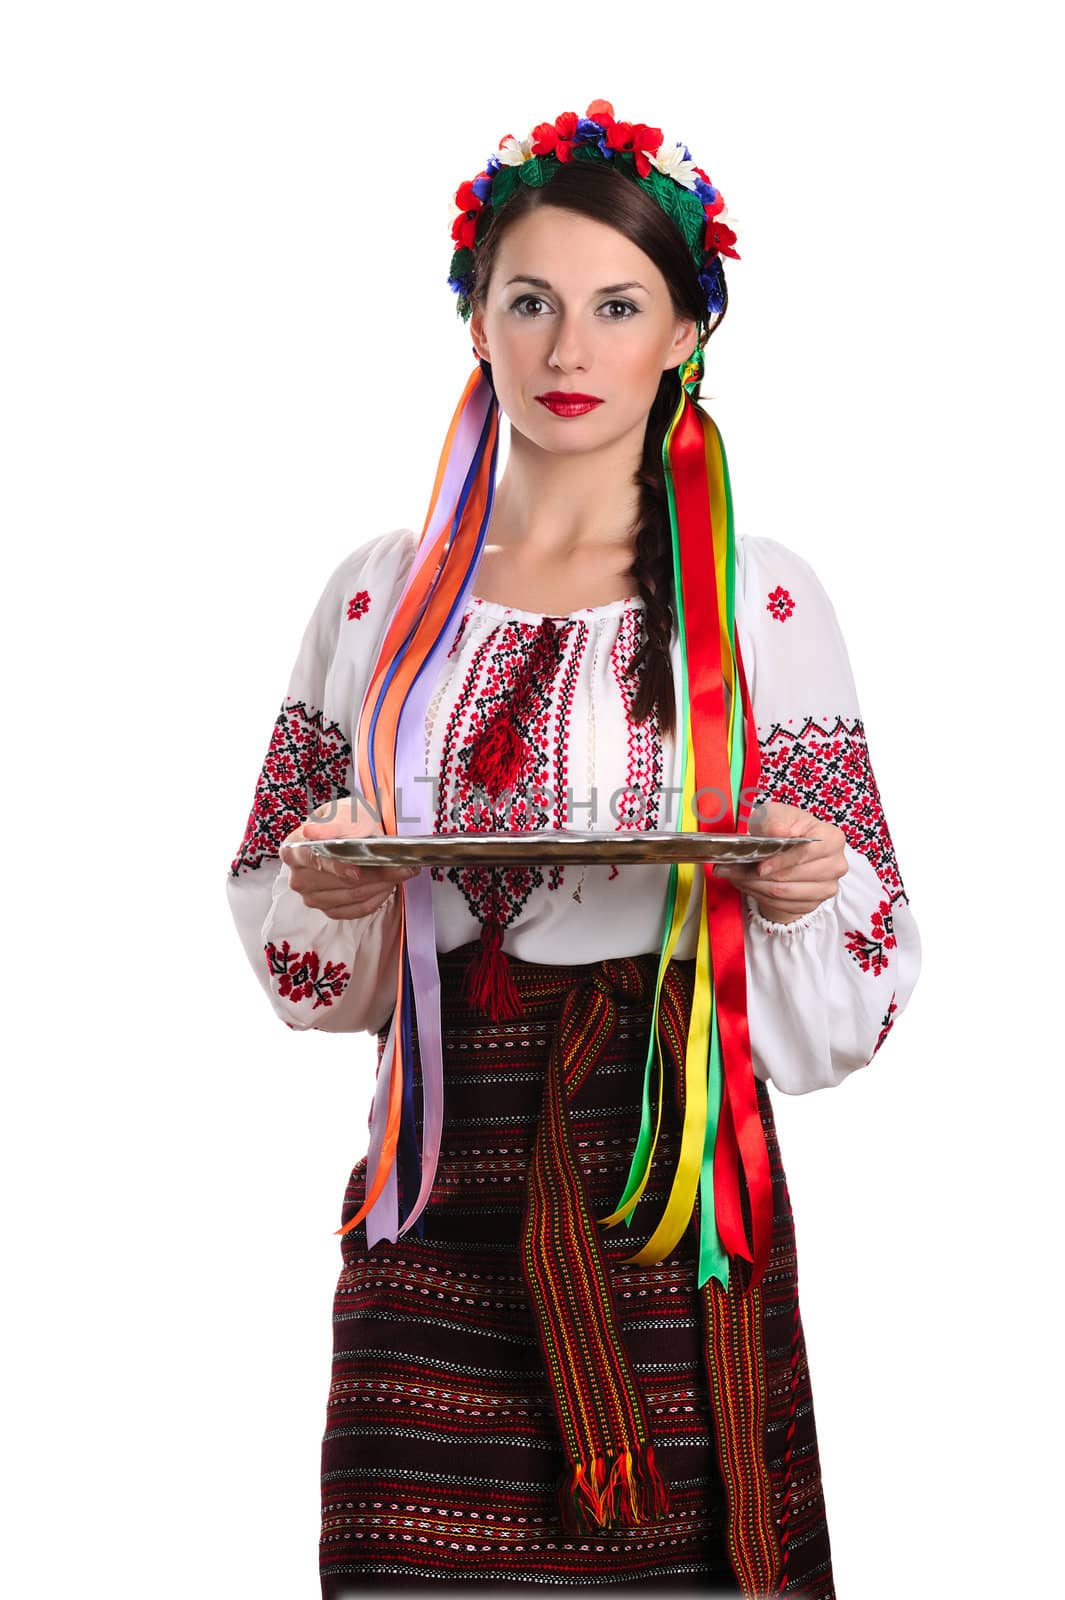 Young Ukrainian woman in national costume holding epmty tray. Isolated on white background